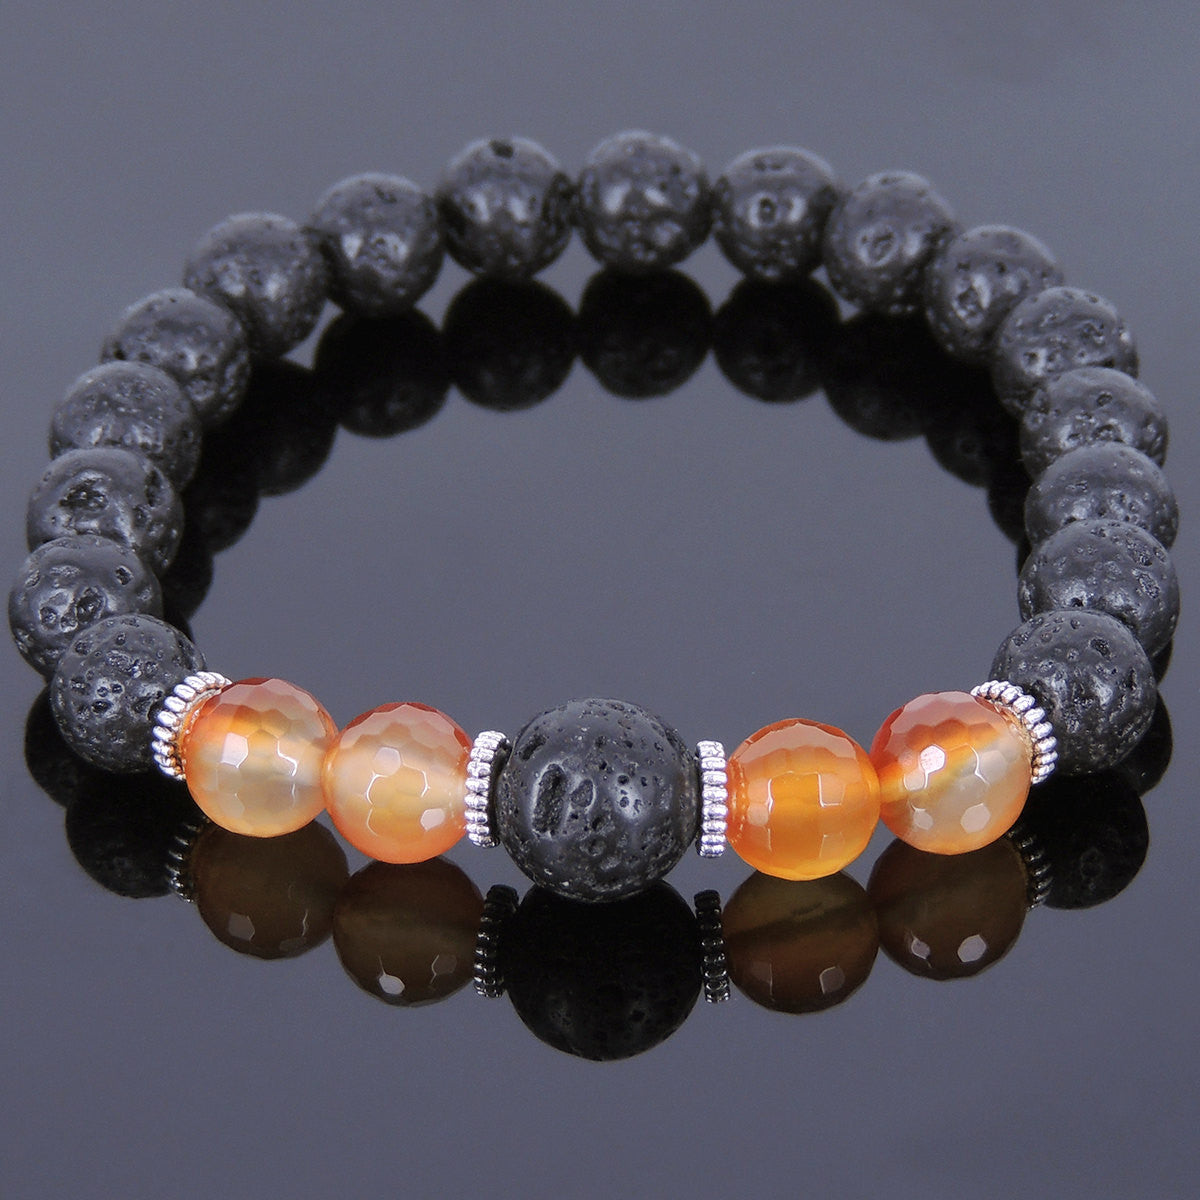 Faceted Red Carnelian & Lava Rock Healing Gemstone Bracelet with Tibetan Silver Spacers - Handmade by Gem and Silver TSB092